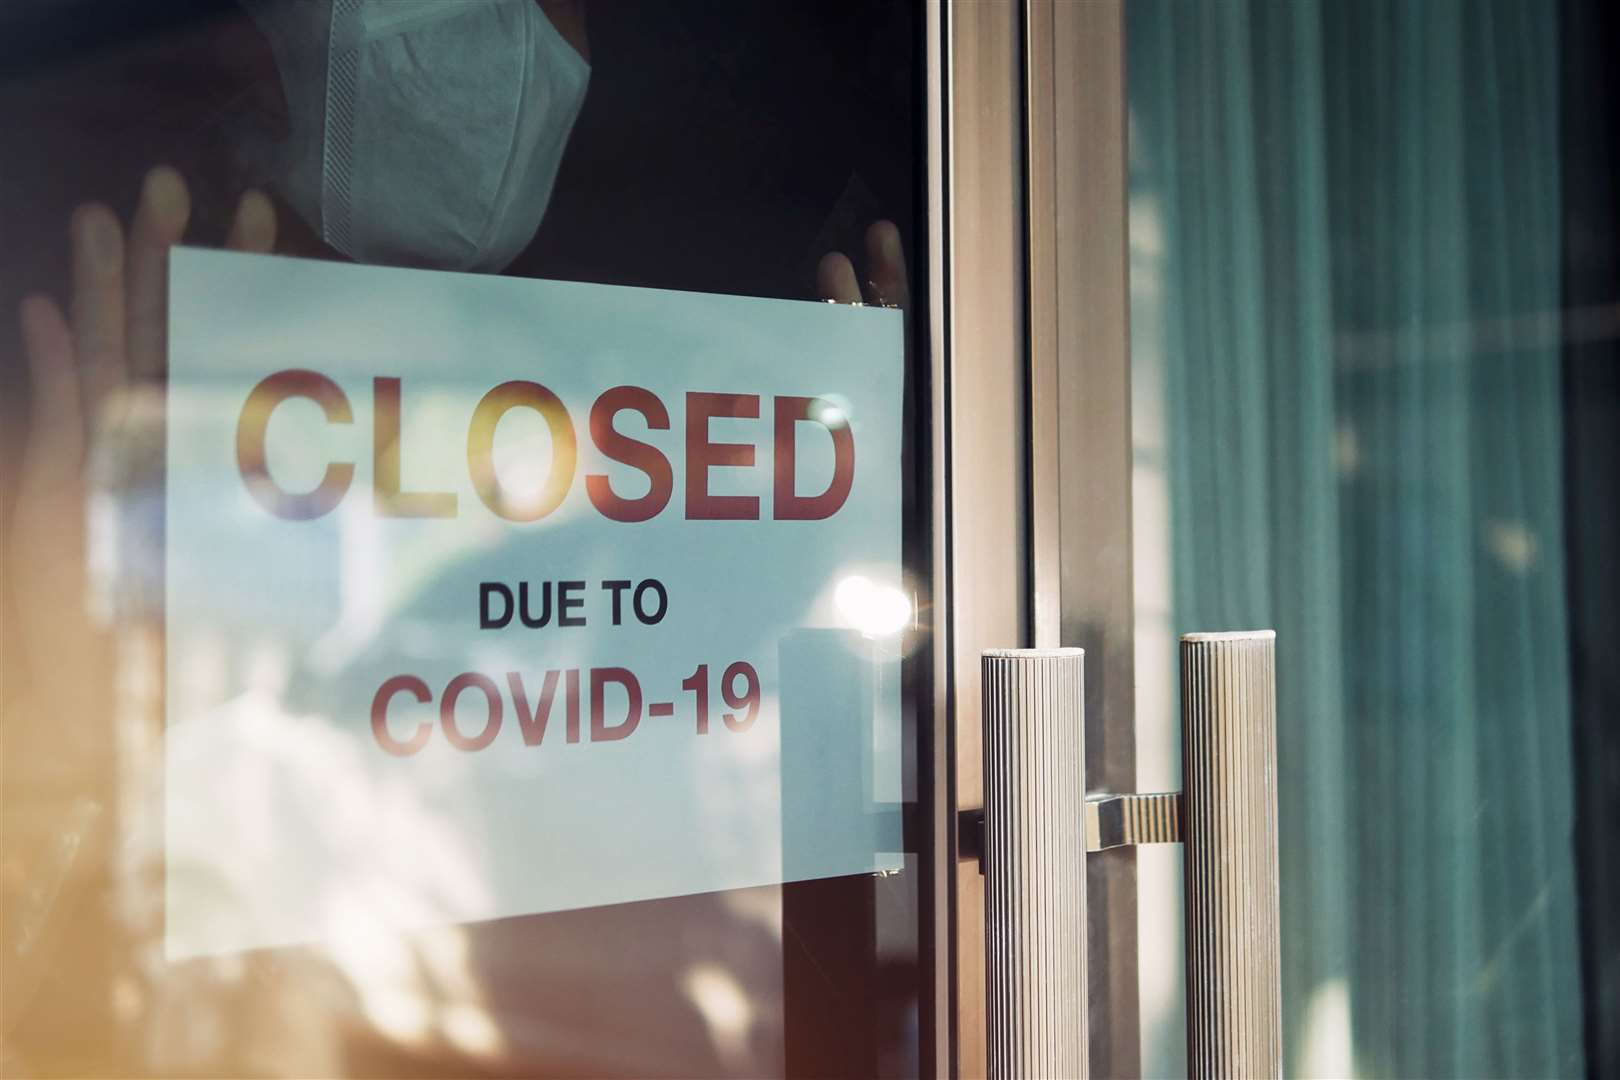 Businesses across the country have had to close due to the pandemic